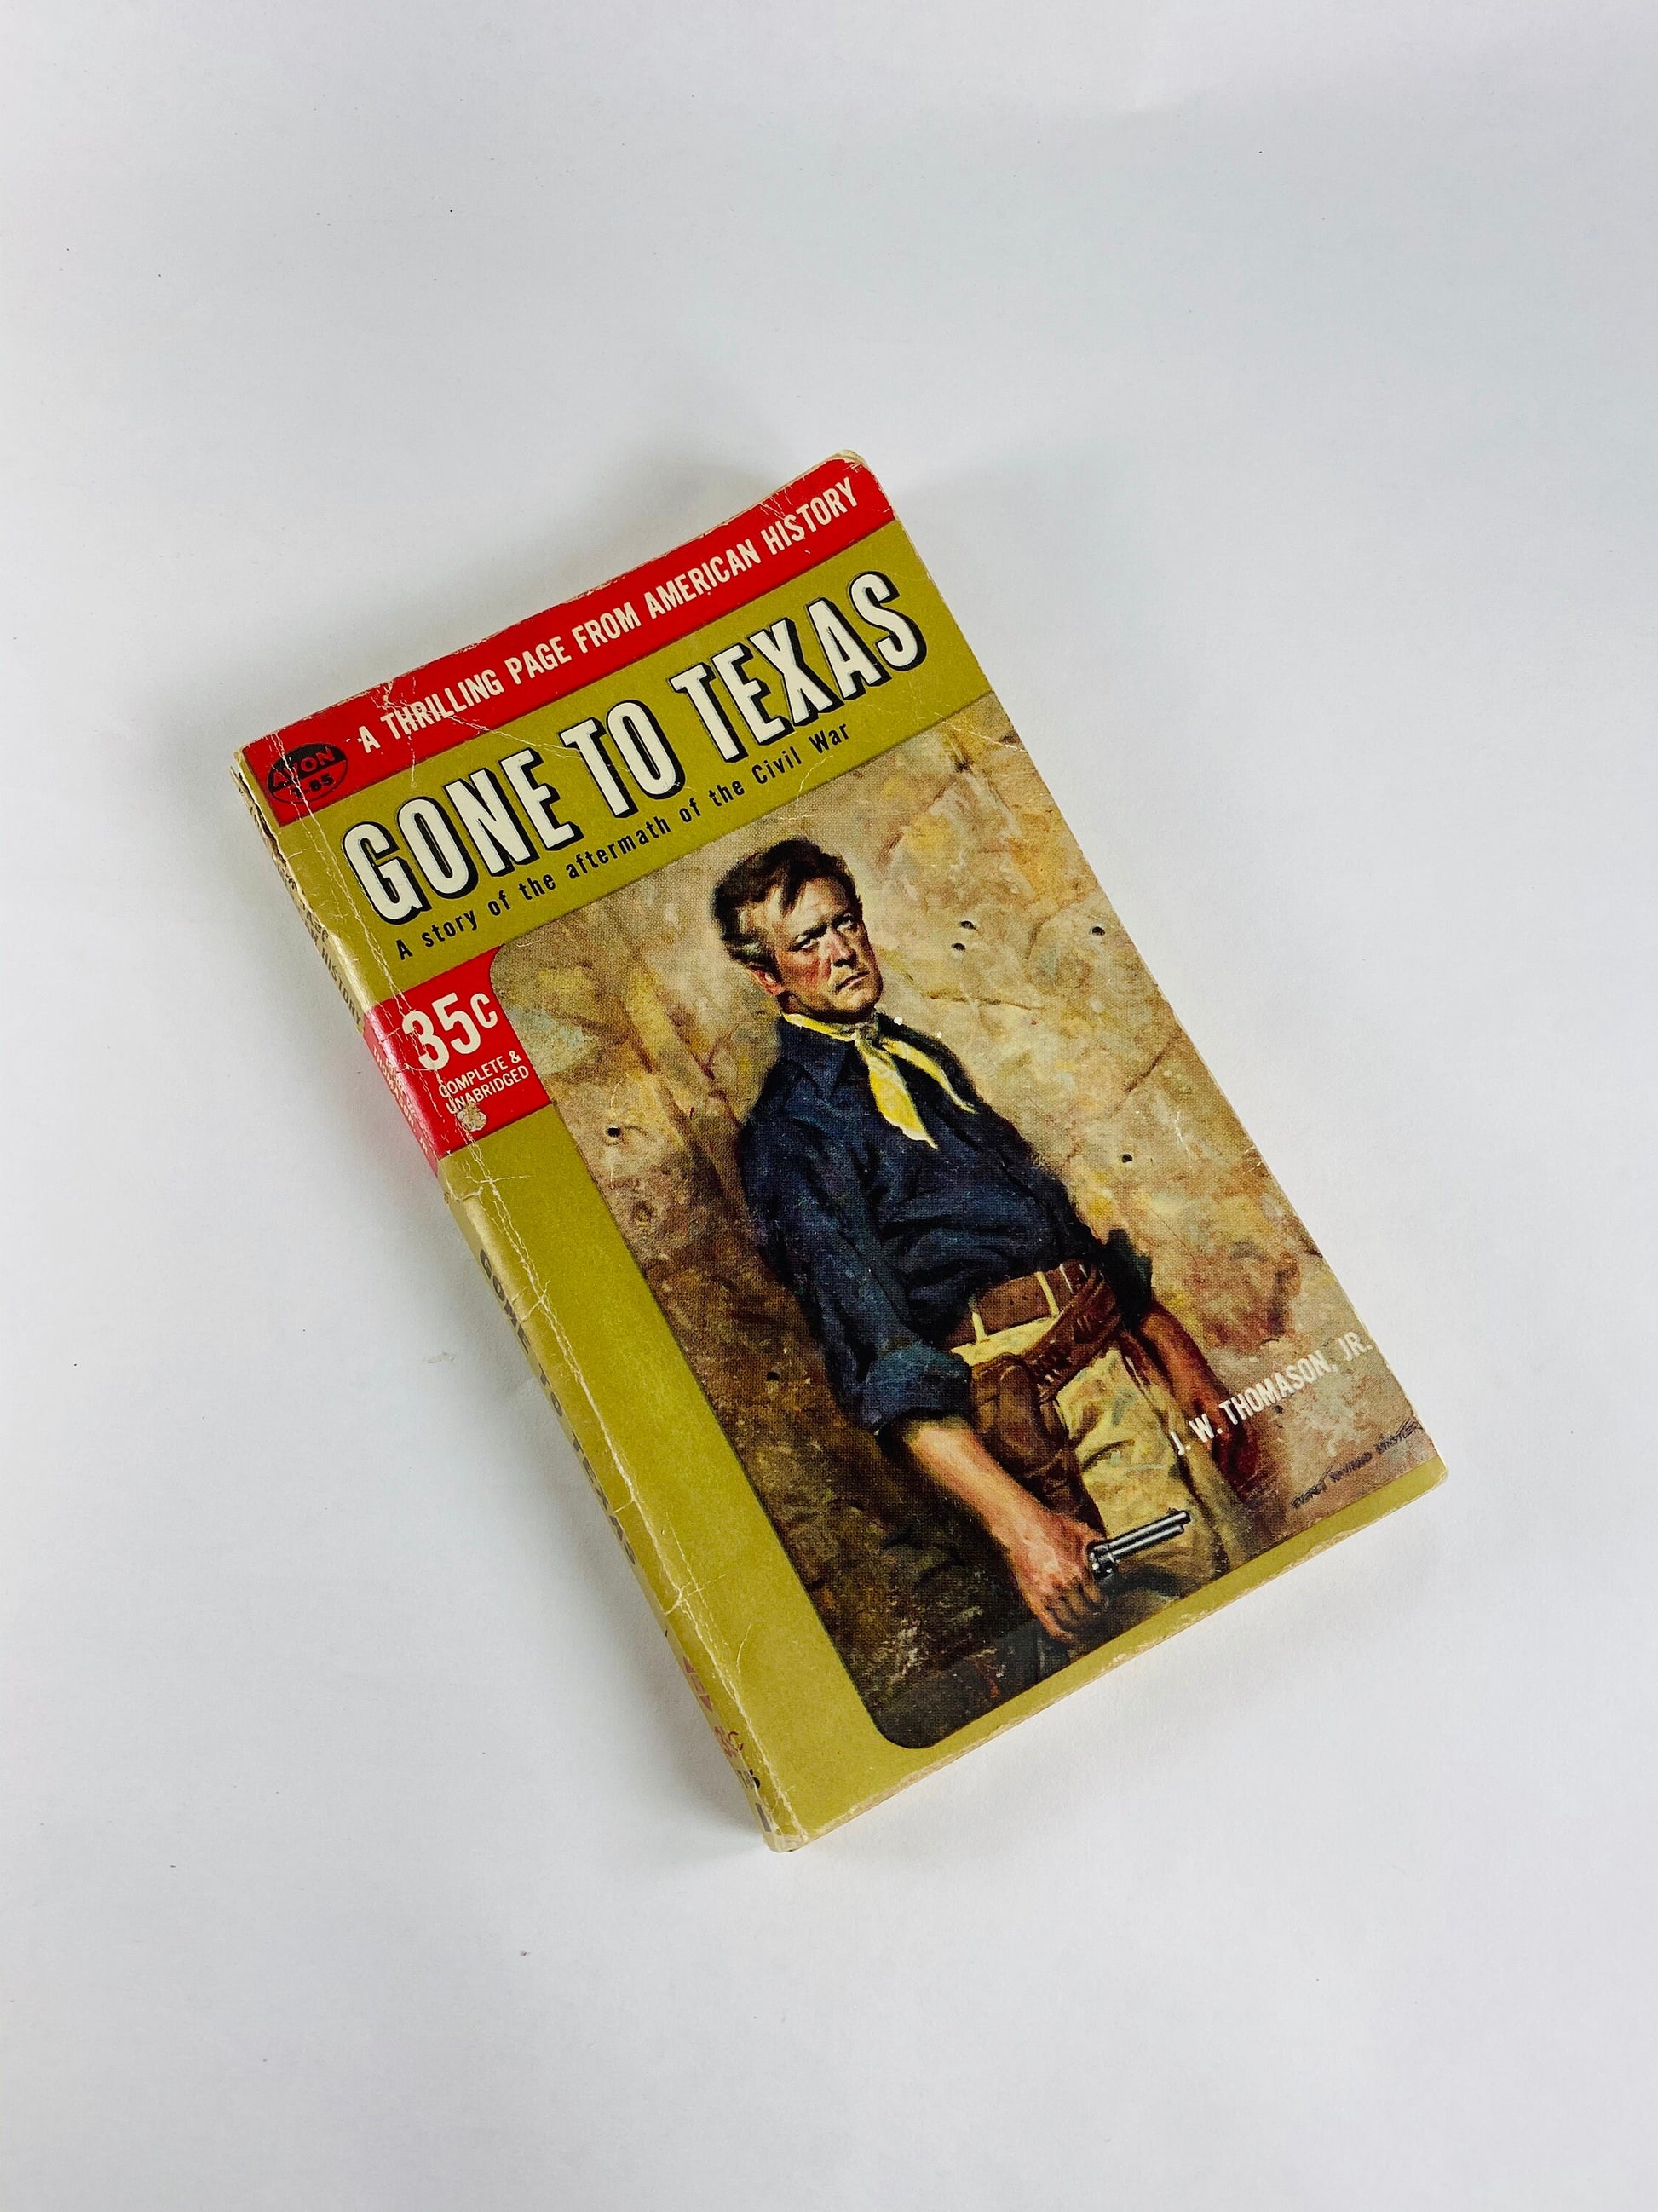 1953 Gone to Texas by John W Thomason. Vintage Avon Western paperback fictional book about the aftermath of the Civil War. American history